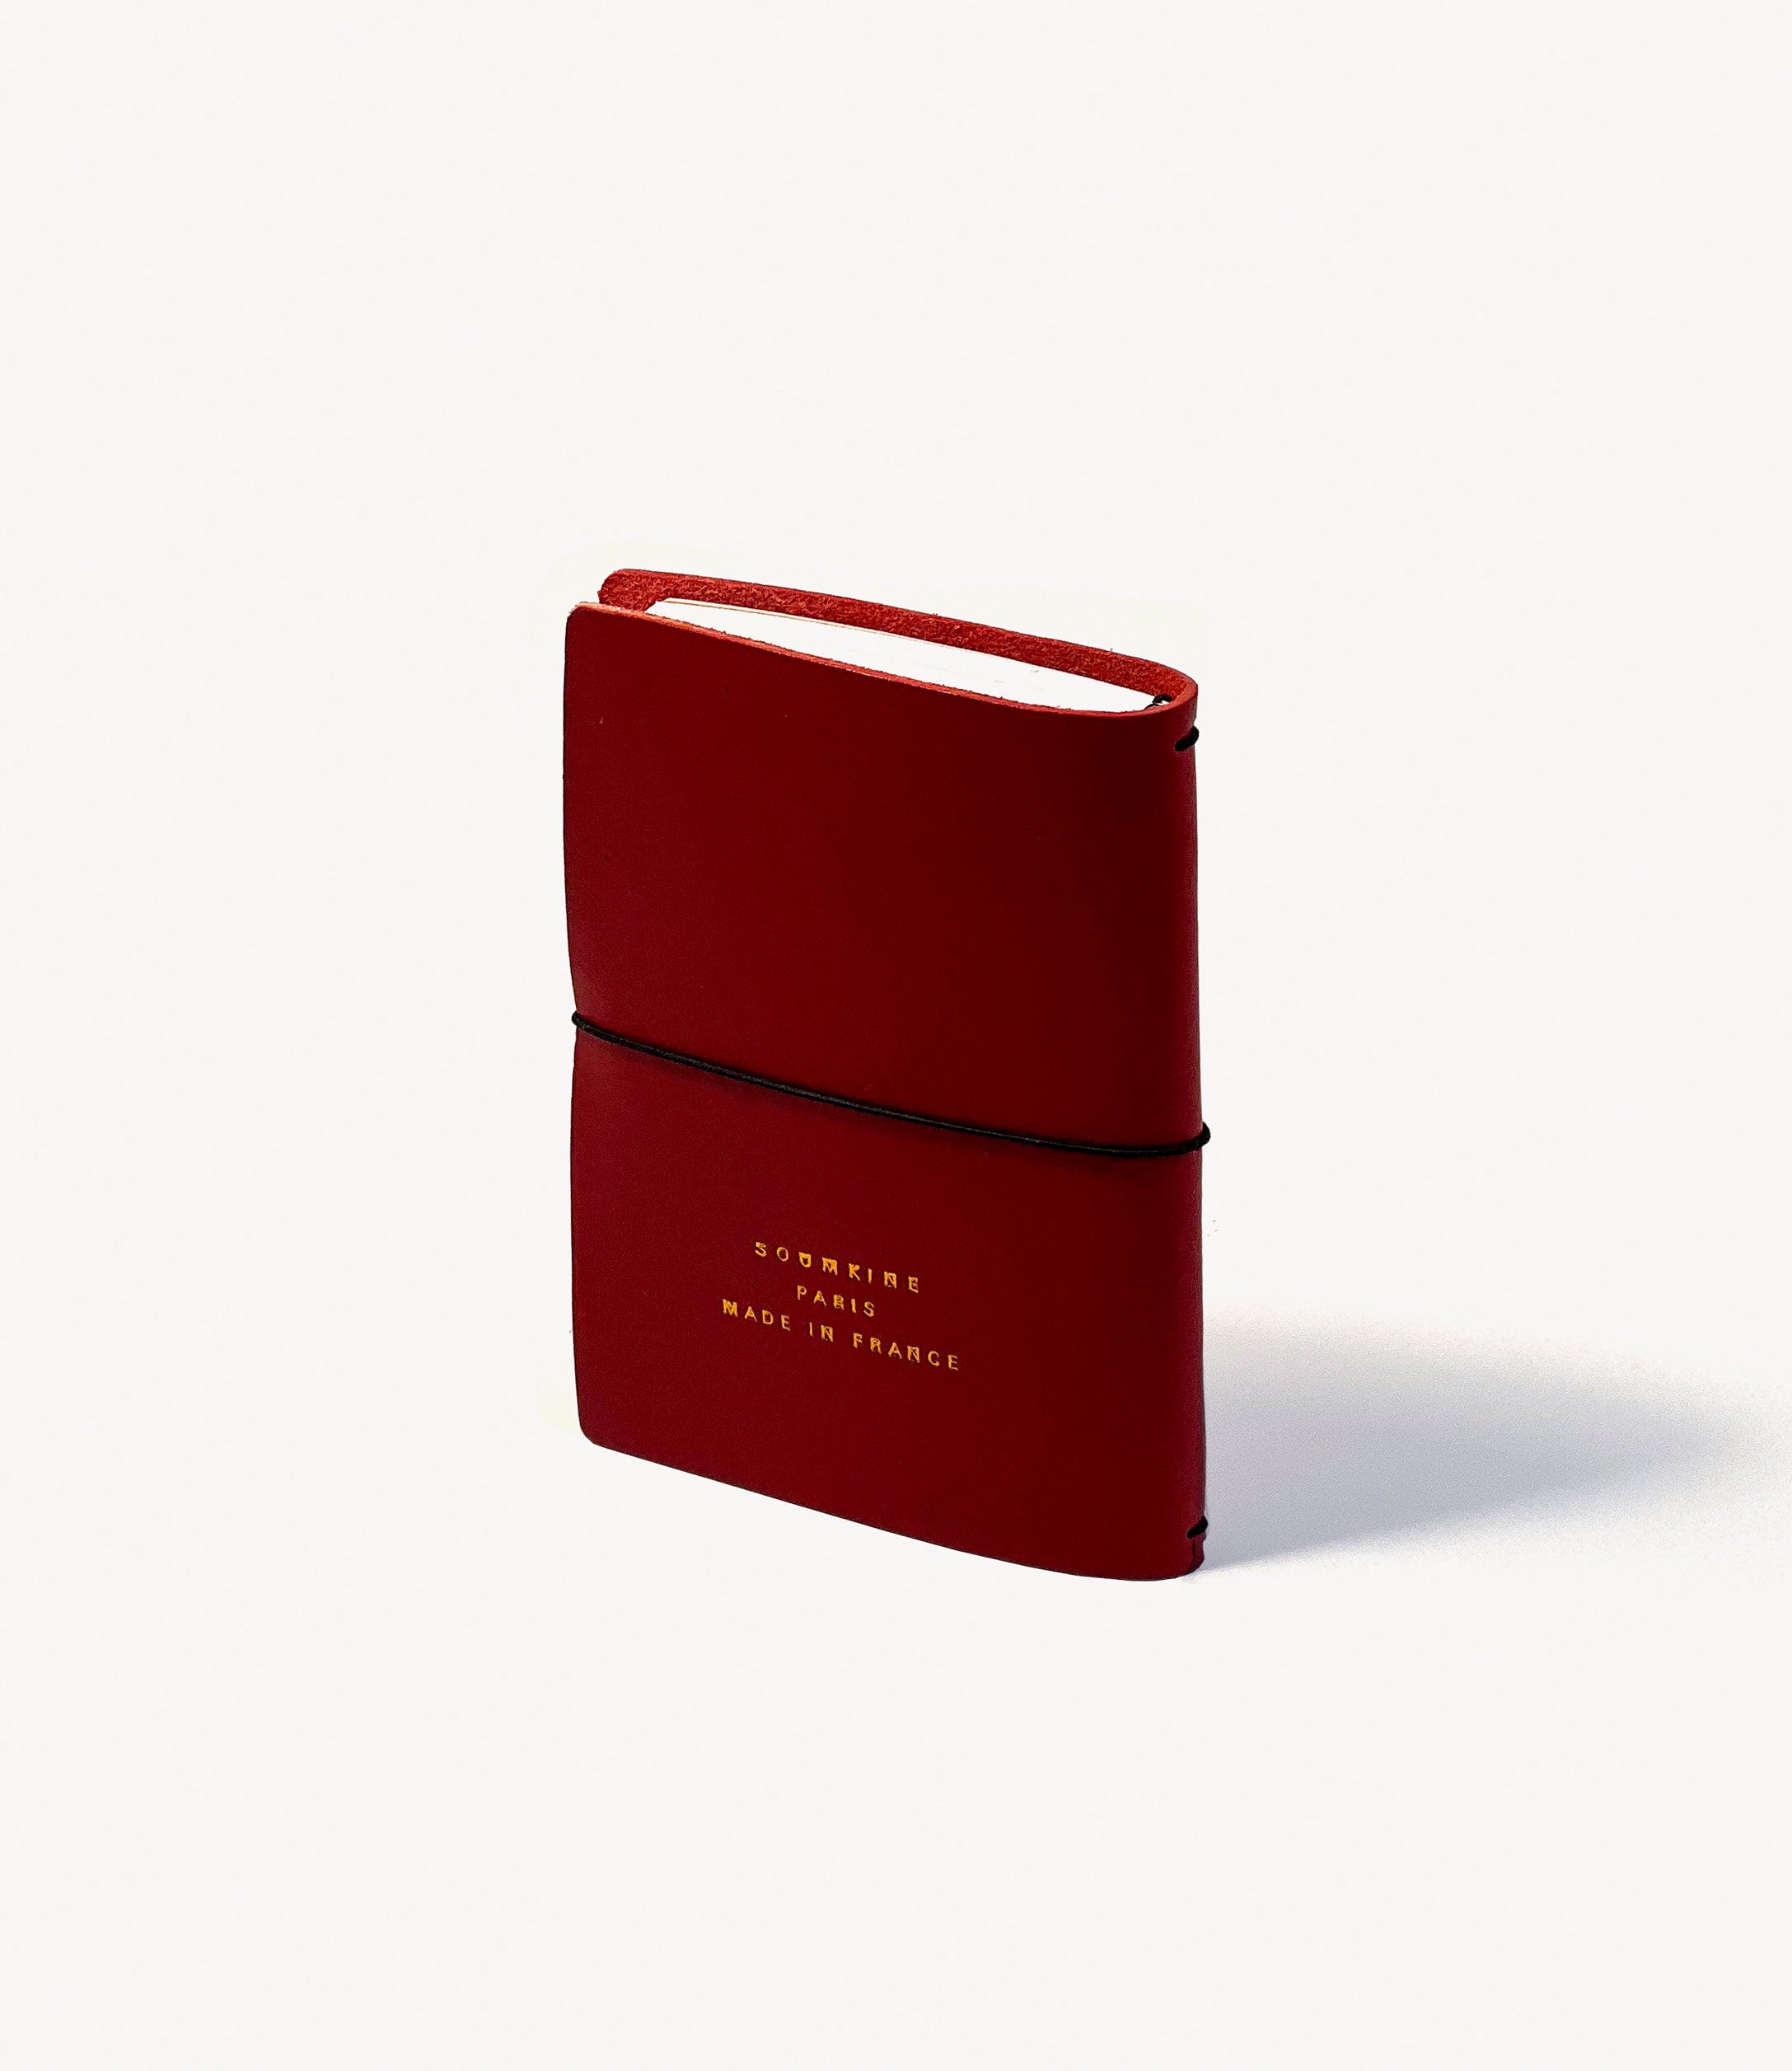 Acrobat Leather cover with 2 Journals. A6 'Pocket' Size. Red Apple color - Soumkine Bespoke